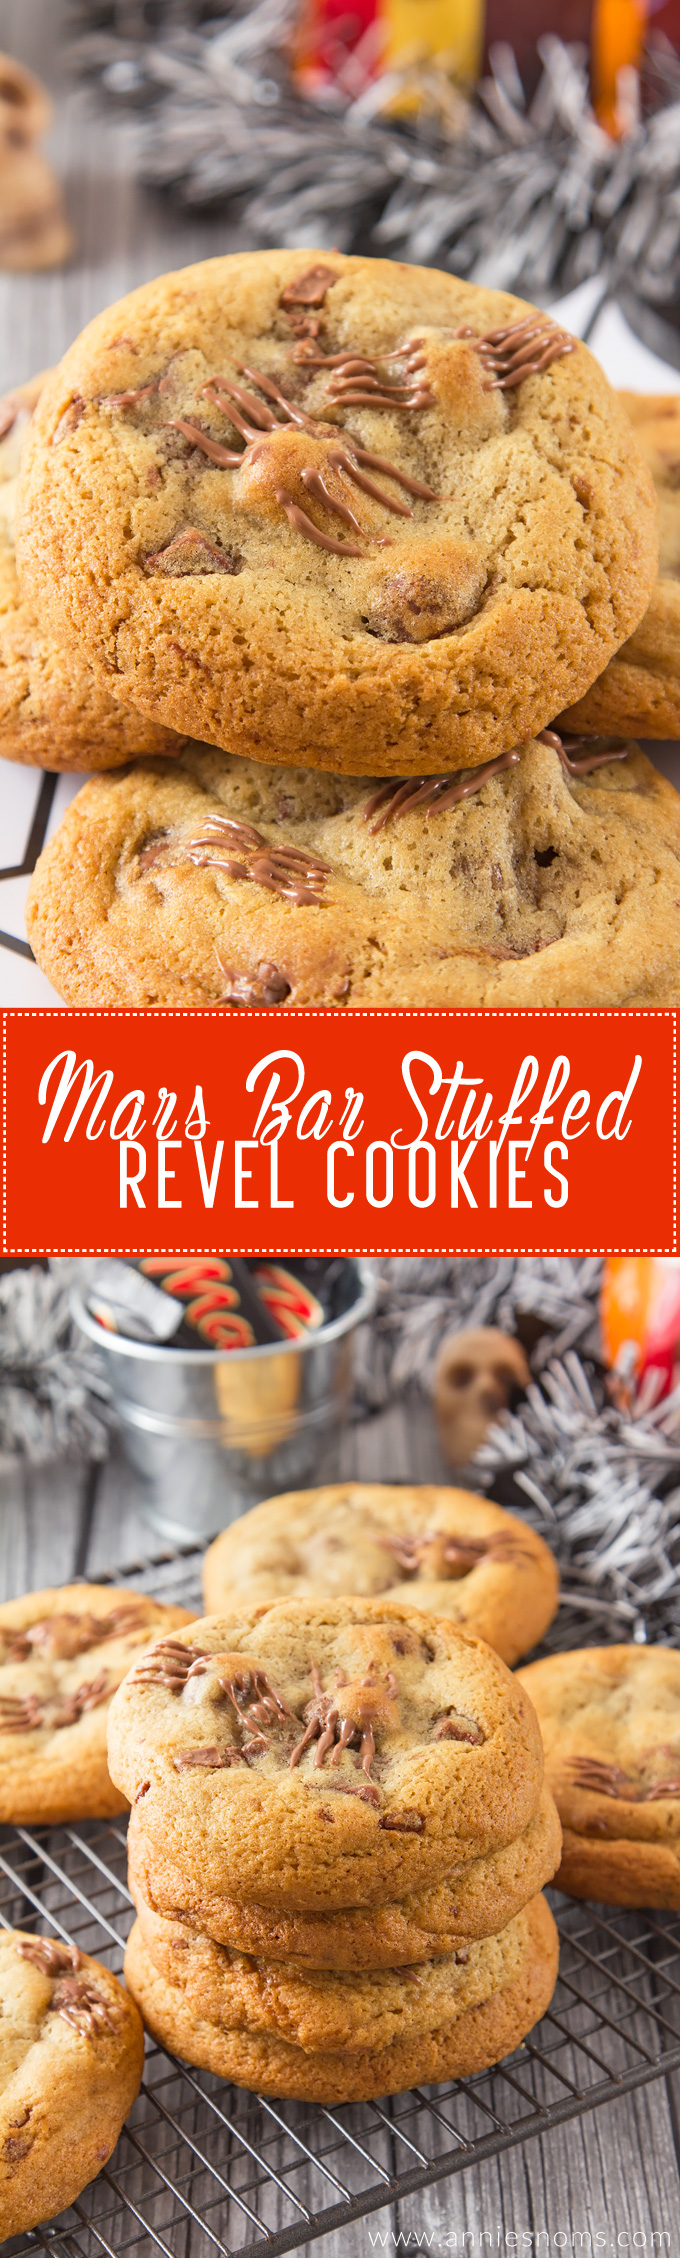 Thick, chewy cookies filled with all the flavours of Revels and stuffed with a big chunk of Mars Bar. These are every chocolate lover's dream come true in cookie form!